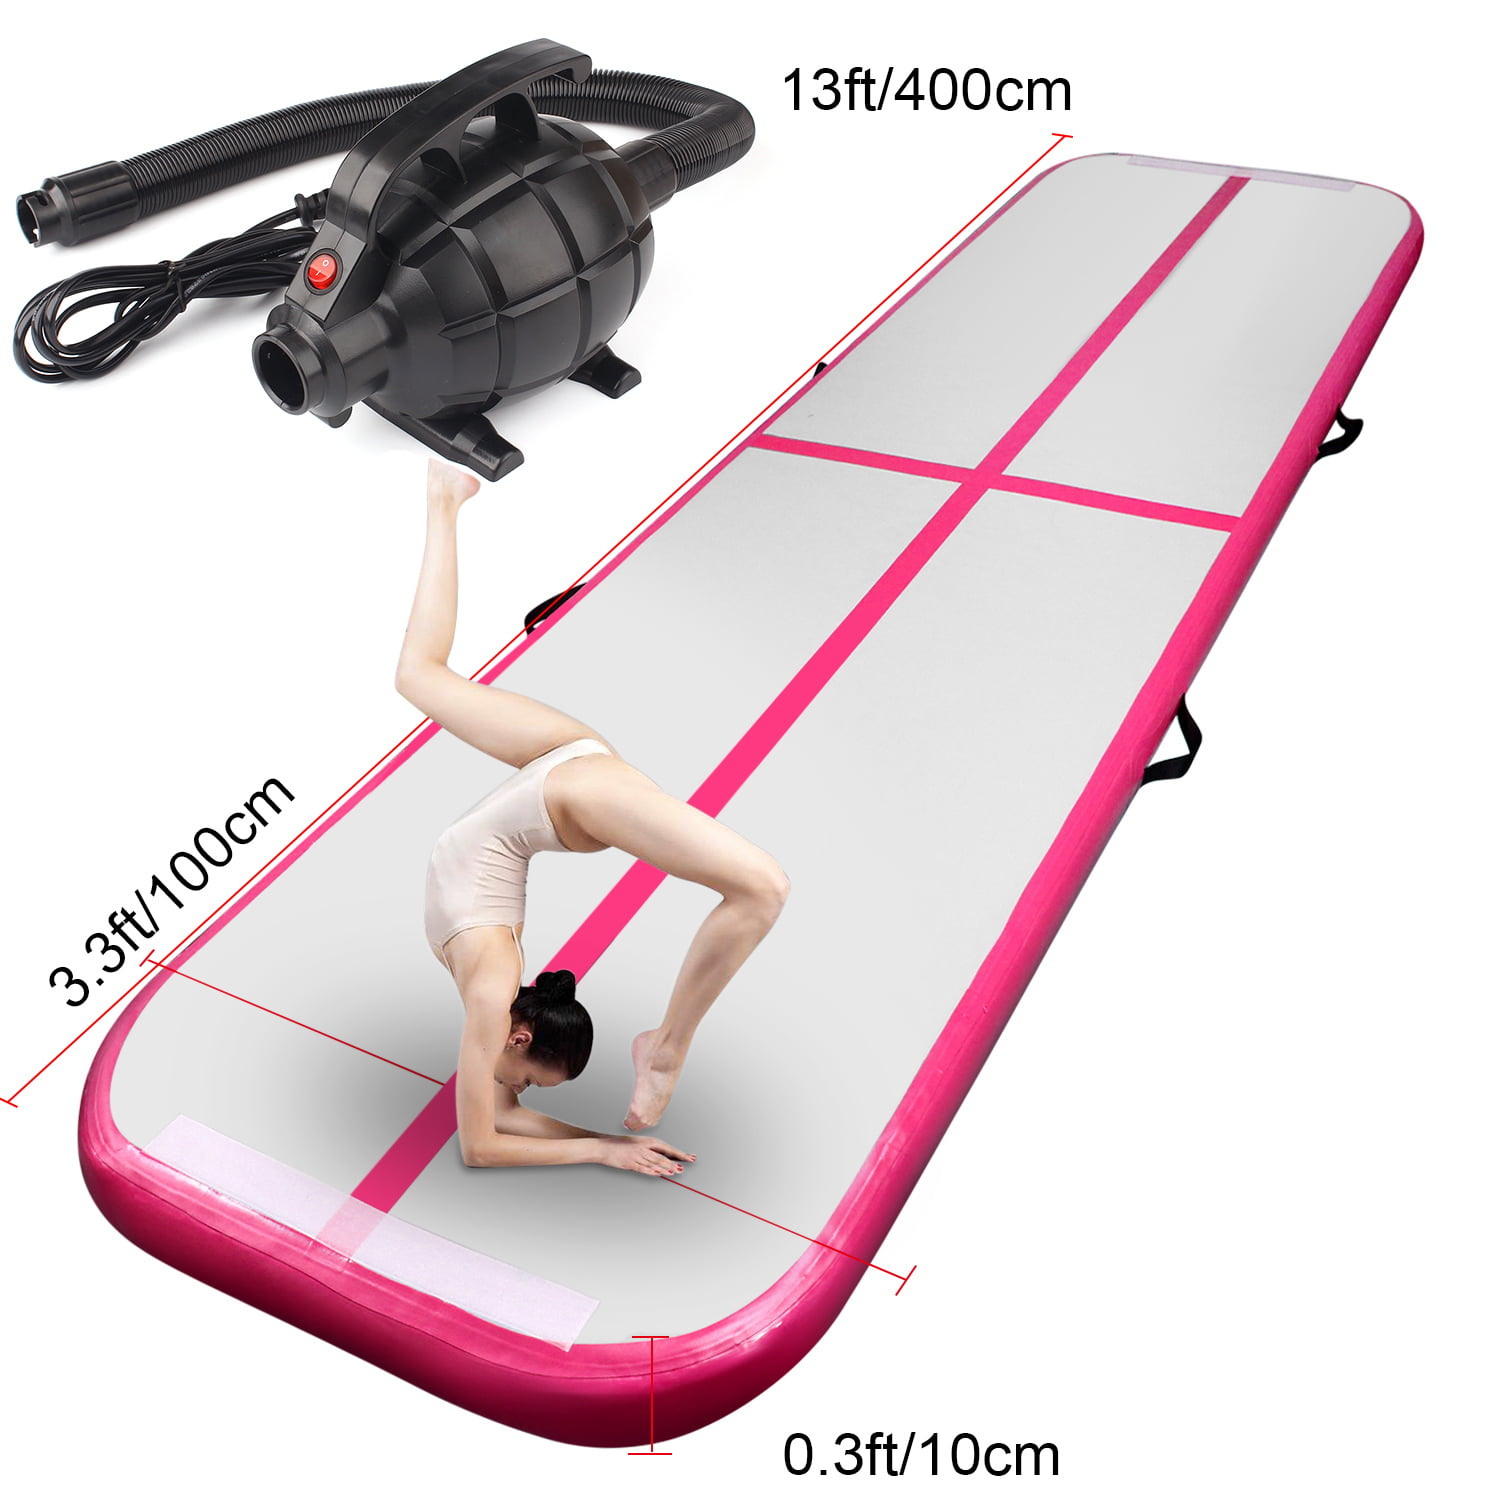 FBSPORT 10ft/13ft/16ft/20ft/23ft/26ft/30ft/33ft/36ft/40ft Inflatable Gymnastics Air Track Tumbling Mat Airtrack Mats for Home Use/Training/Cheerleading/Yoga/Water with Pump